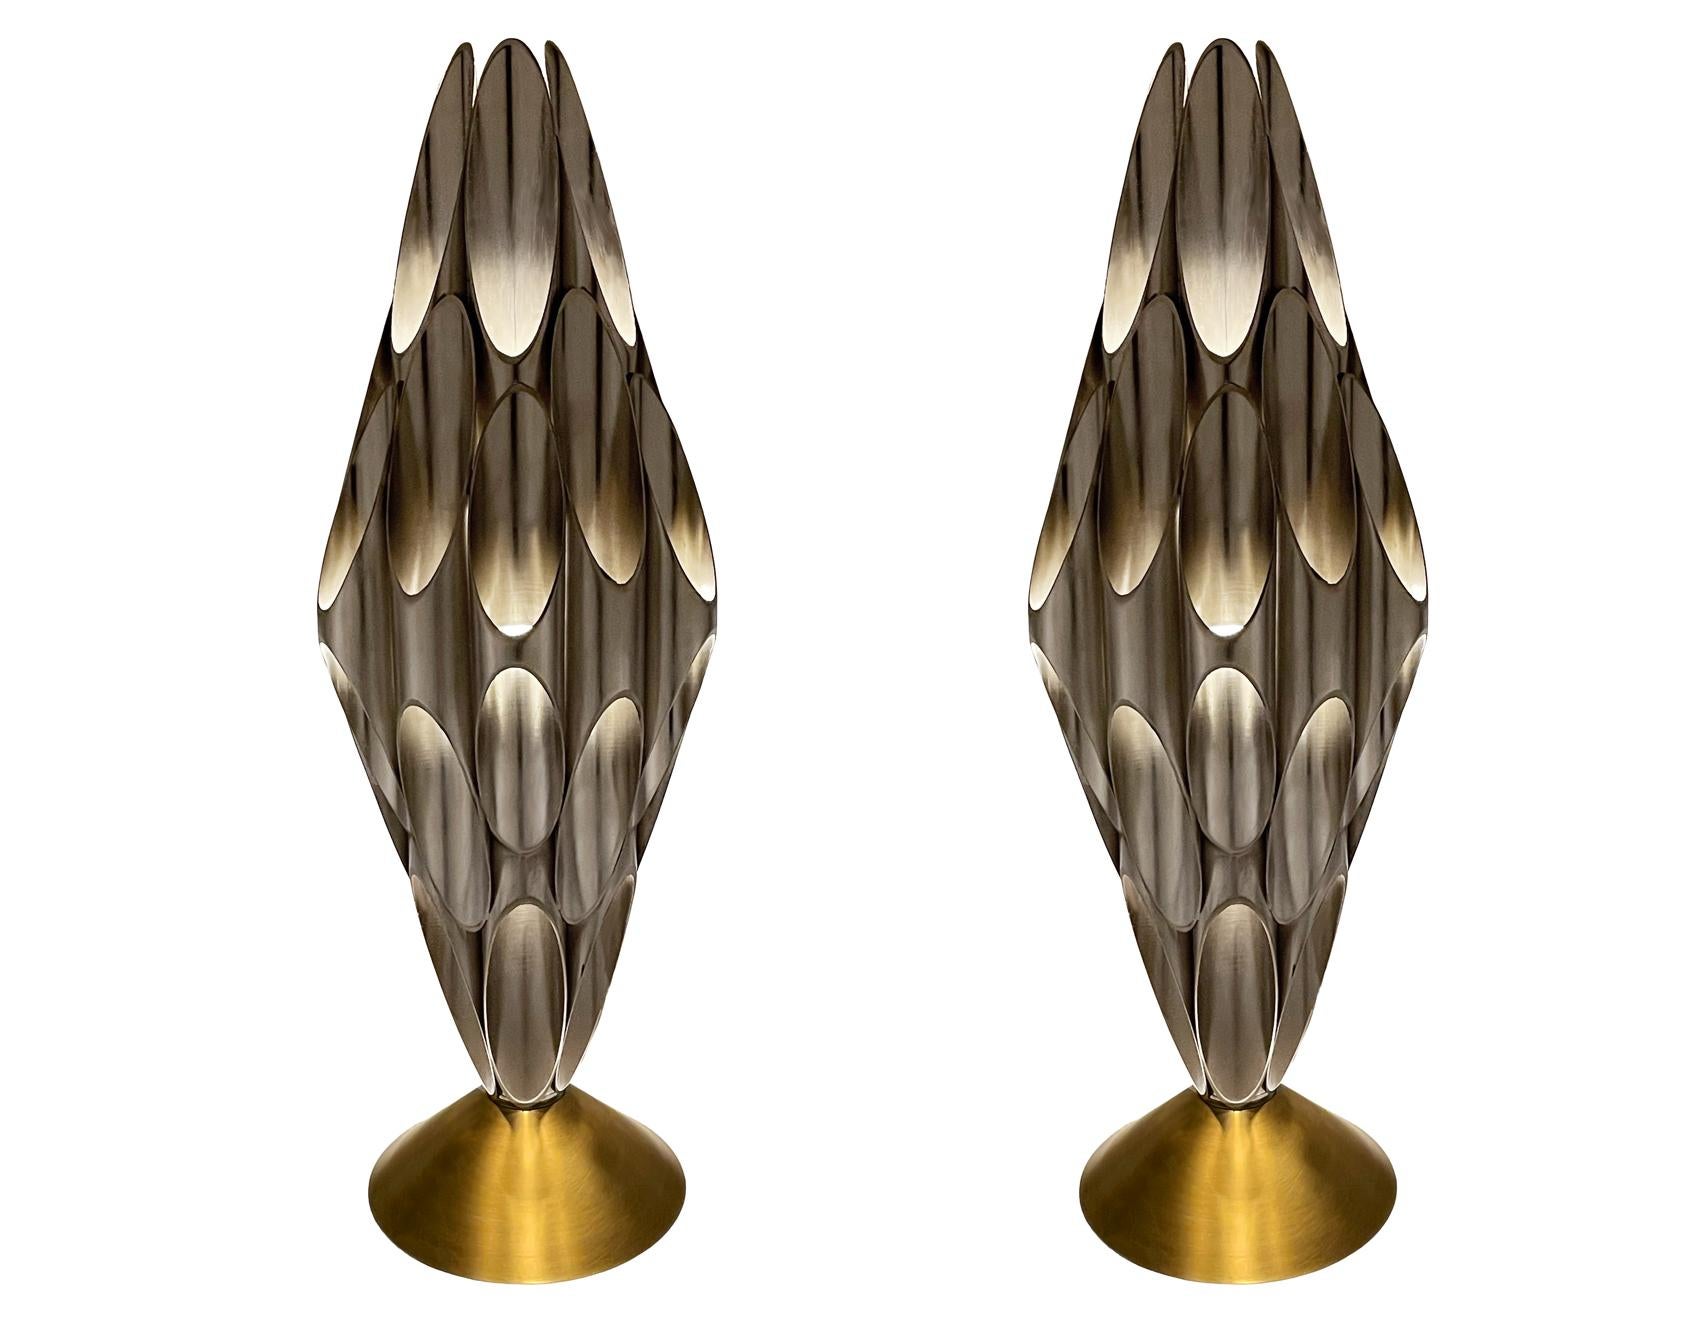 Pair of Hollywood Regency Glam Table Sculpture Accent Lamps in Gold & Silver For Sale 2